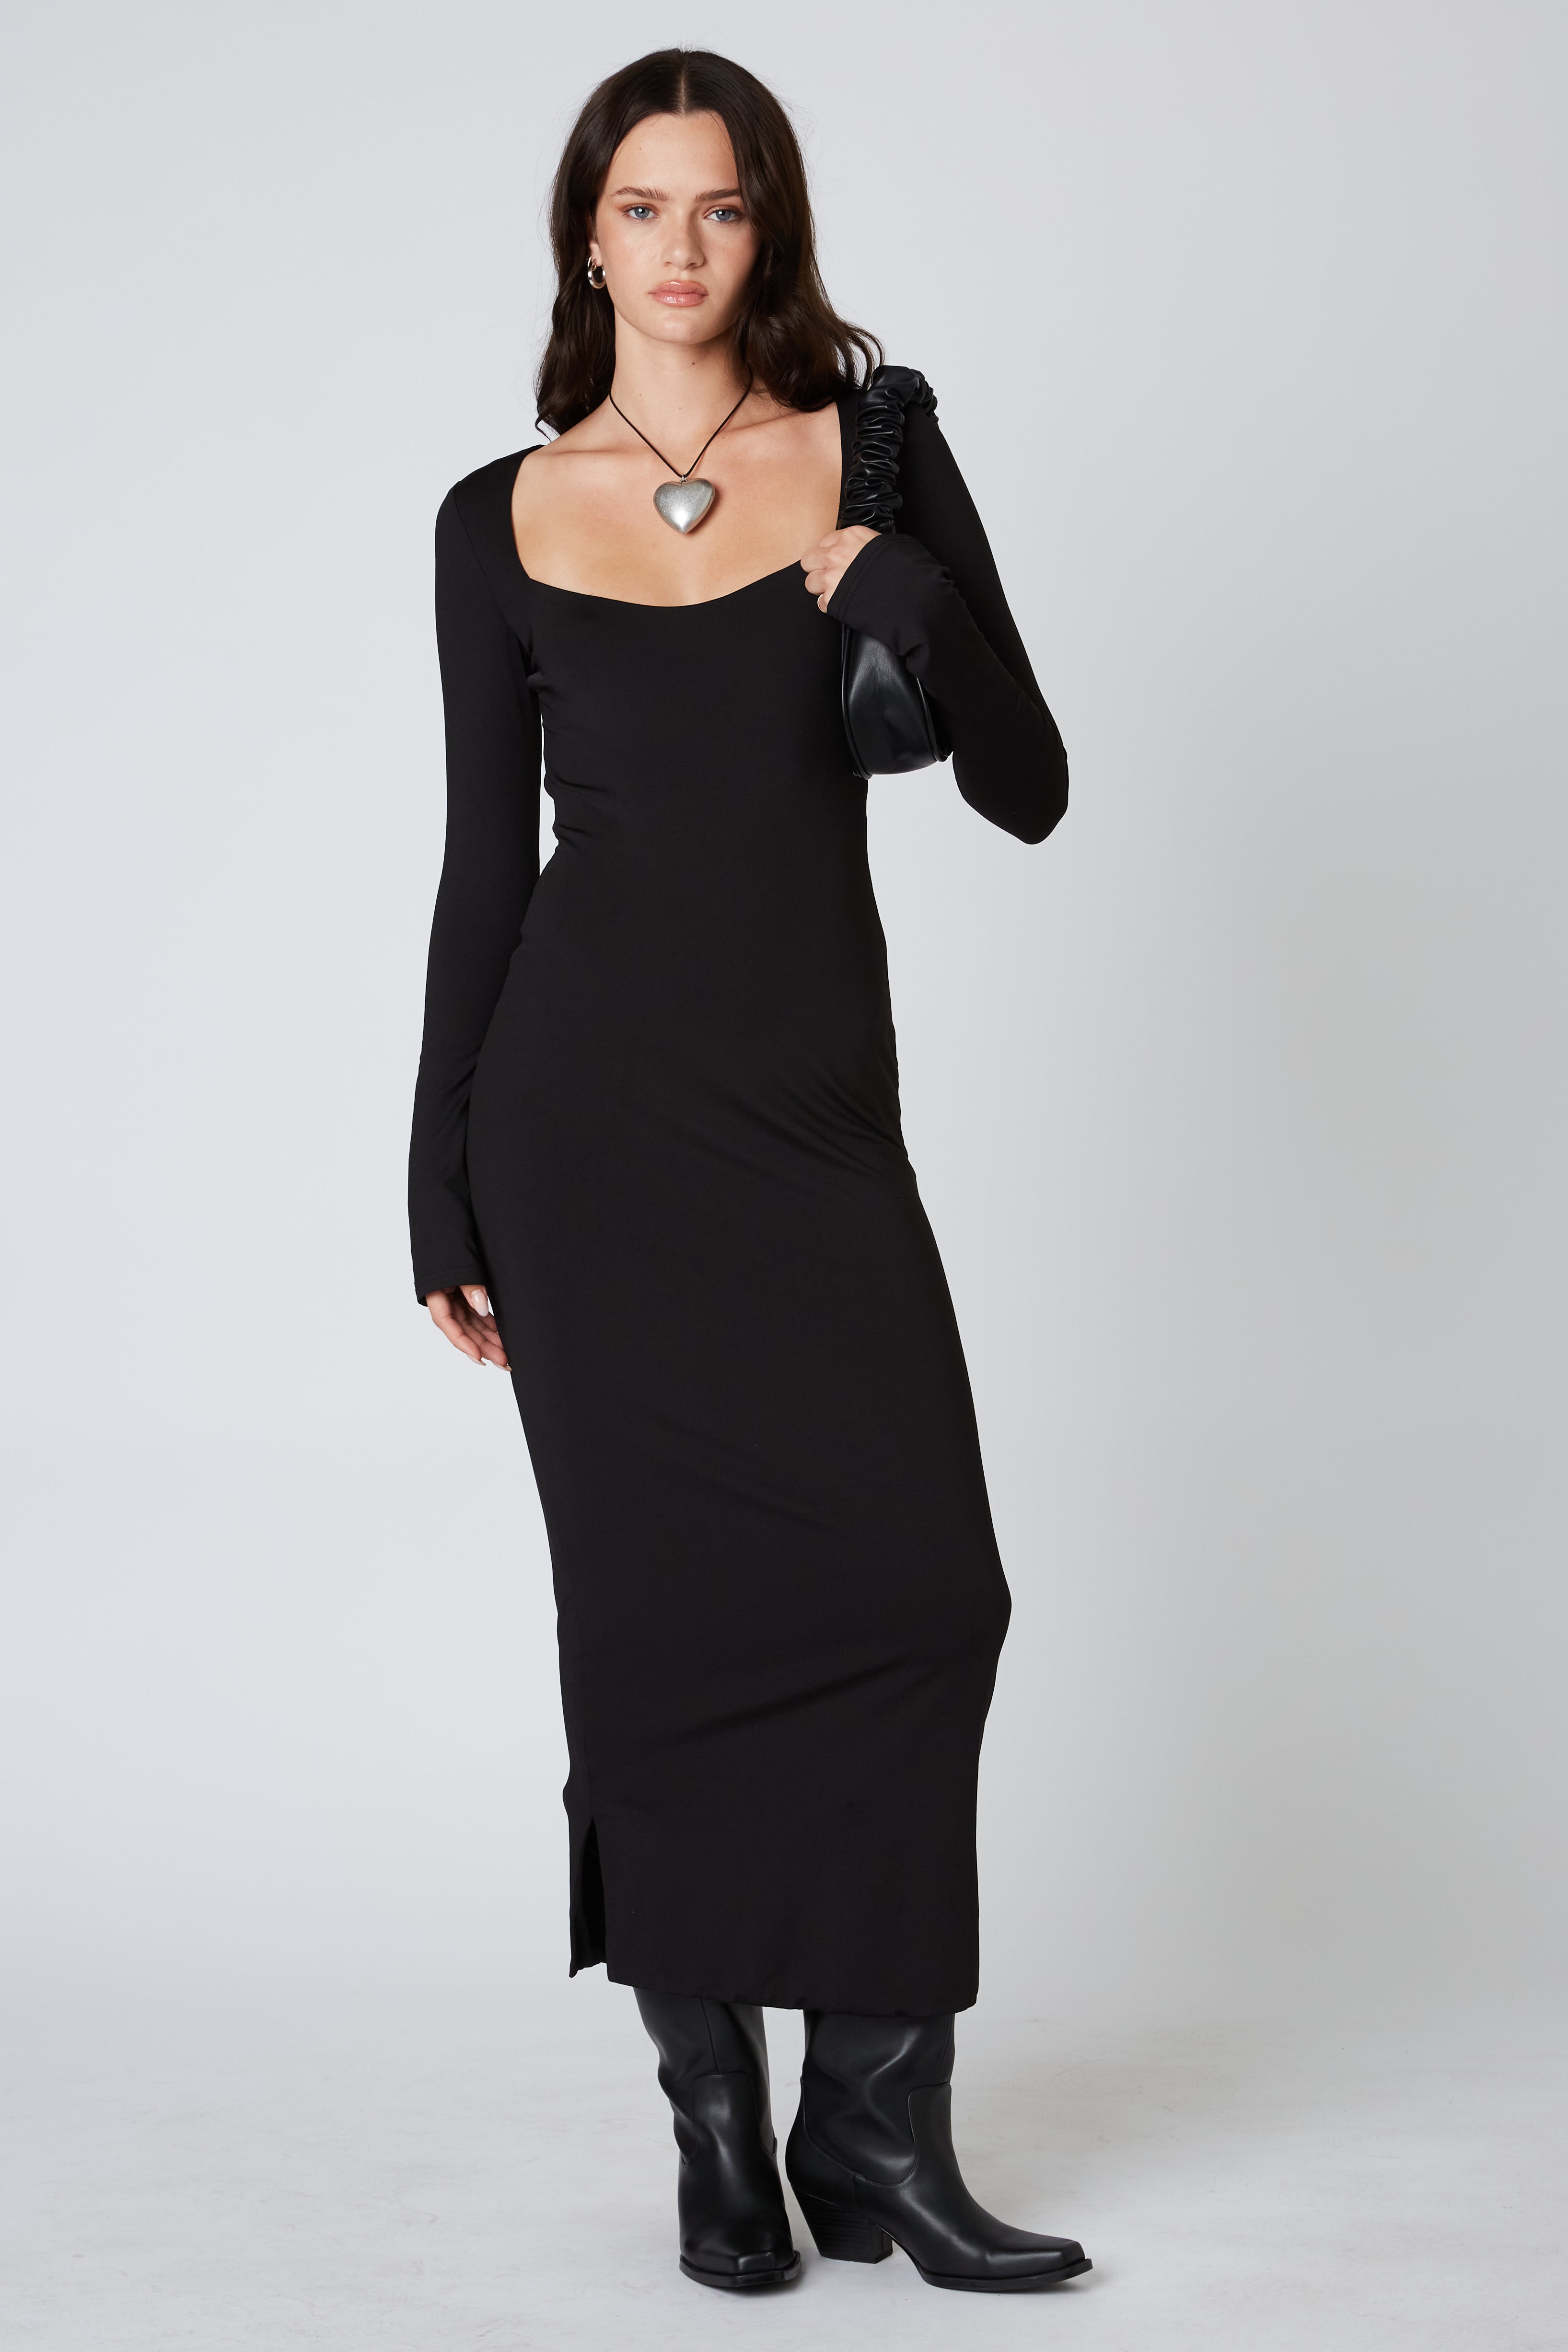 Long Sleeve Maxi Dress in black front view